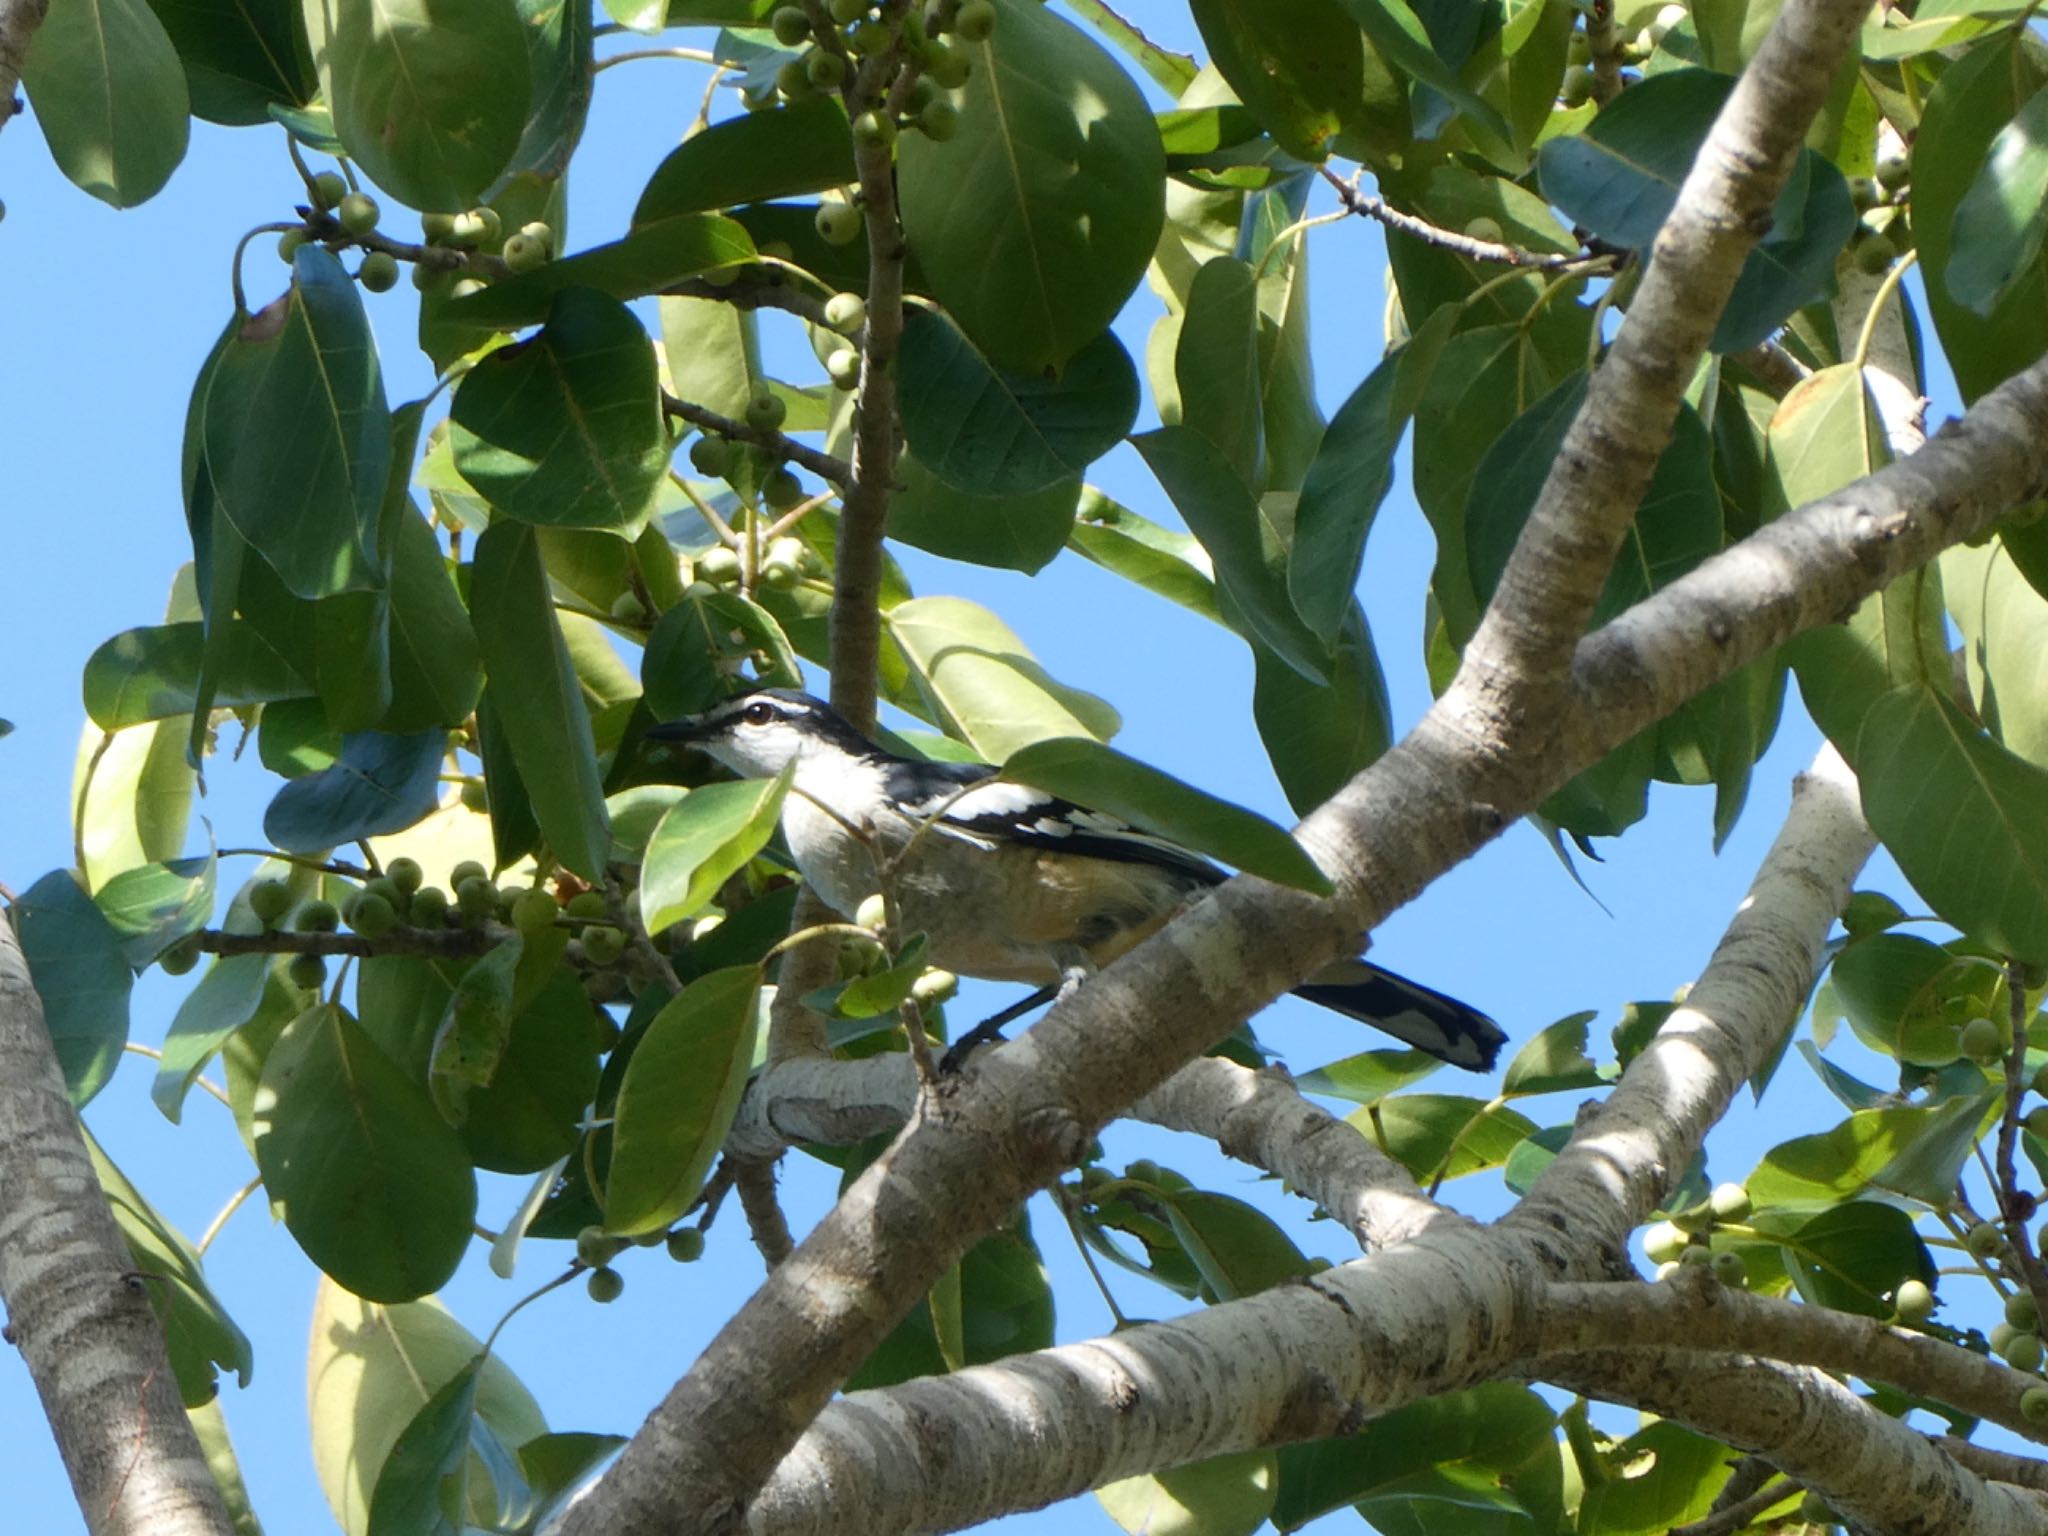 Photo of Varied Triller at East Point Reserve, Darwin, NT, Australia by Maki